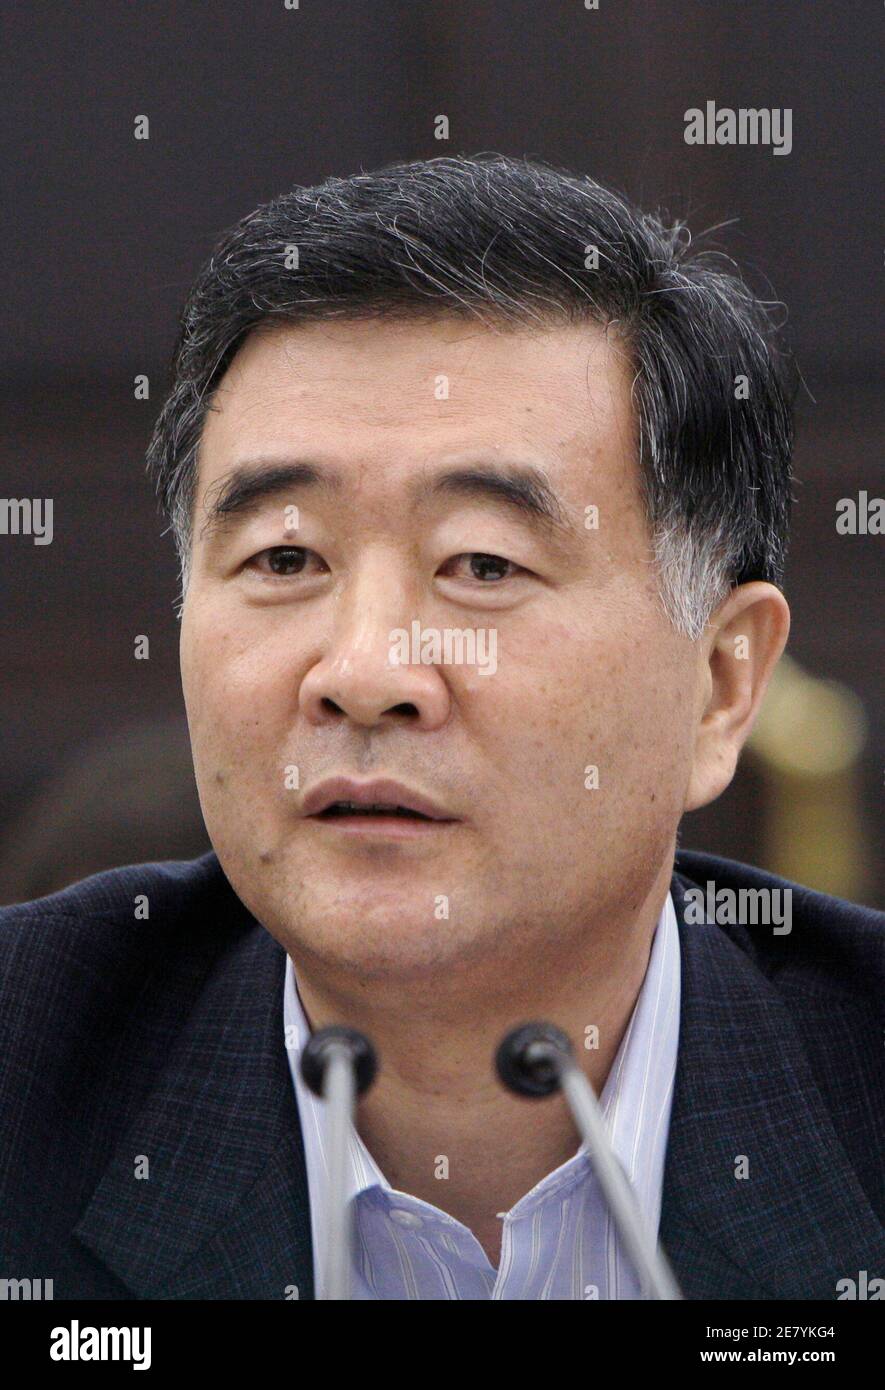 Wang Yang, Guangdong's powerful Communist Party boss who has close ties to President Hu Jintao, speaks during a news conference in the southern Chinese city of Guangzhou July 30, 2009. Wang said it was time for a rethink on ethnic policies, though he did not say specifically what was wrong or offer solutions. A senior Chinese official made a rare admission on Thursday that the country had to change its policies toward ethnic minorities in light of deadly riots in far western Xinjiang this month.    REUTERS/Tyrone Siu    (CHINA POLITICS) Stock Photo